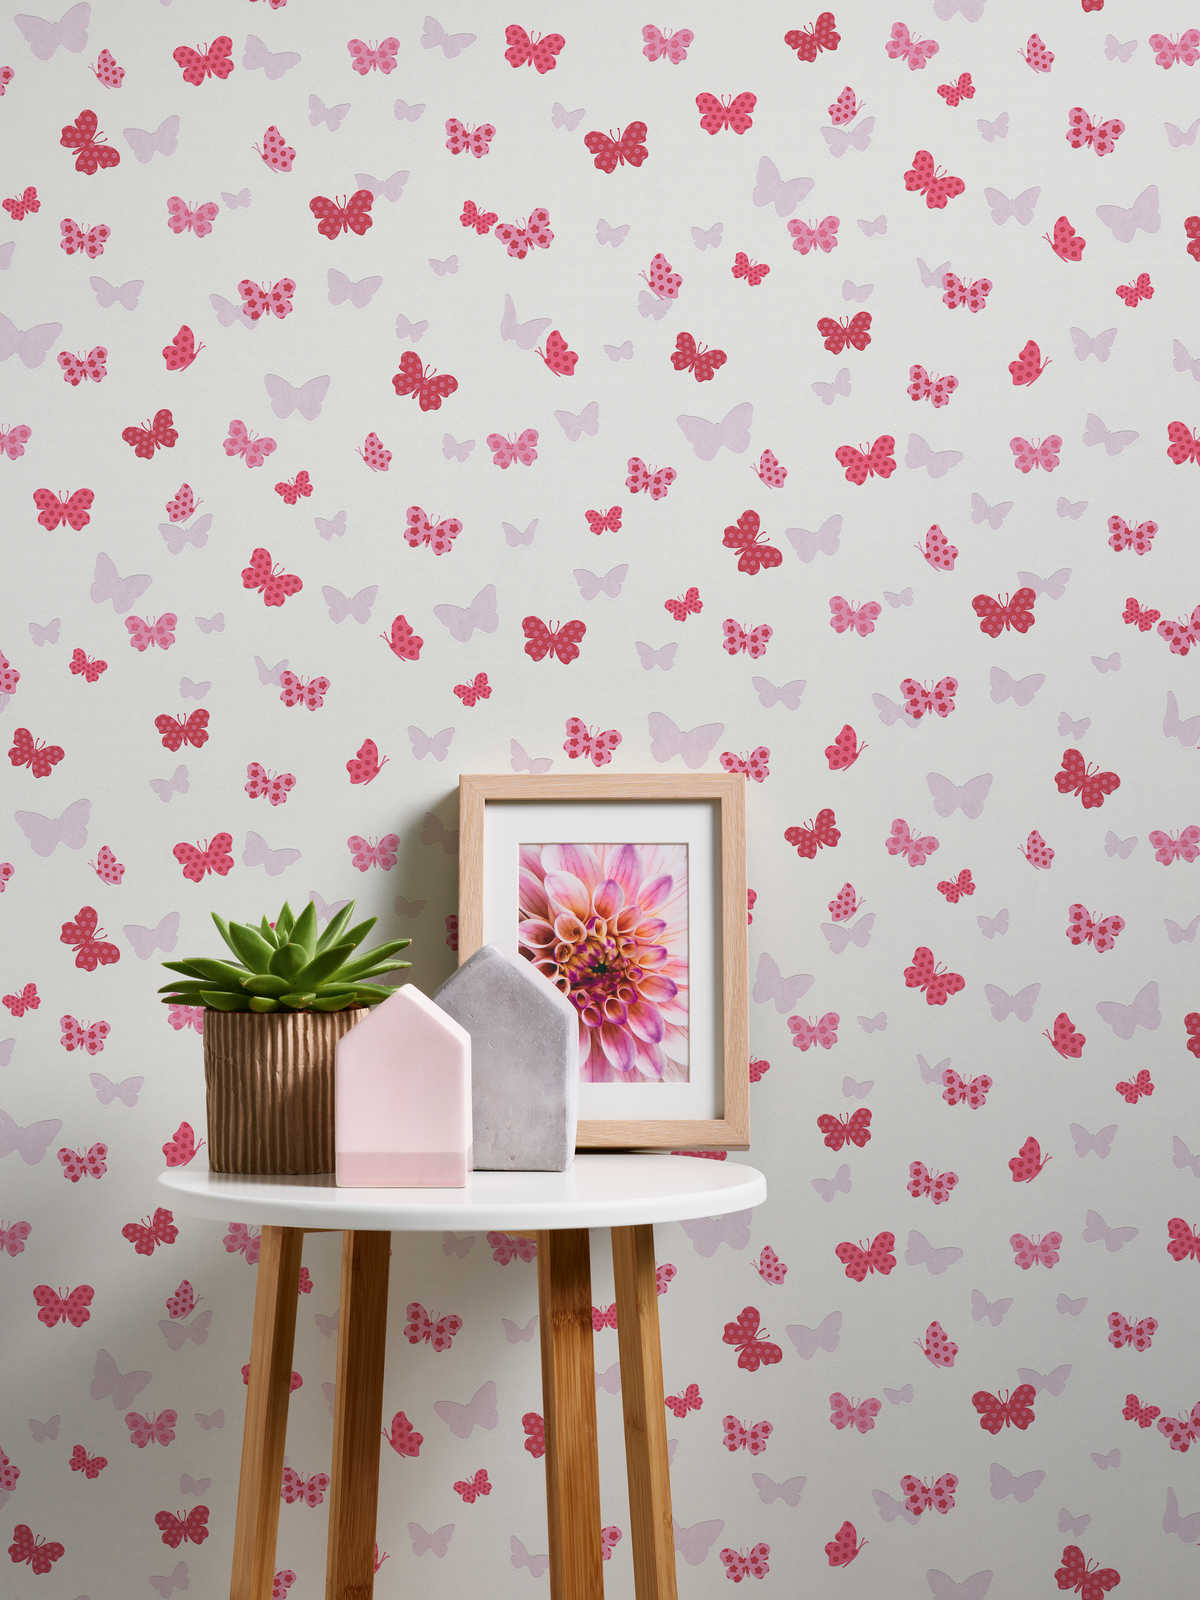             Butterfly wallpaper patterned for Nursery - white, red, pink
        